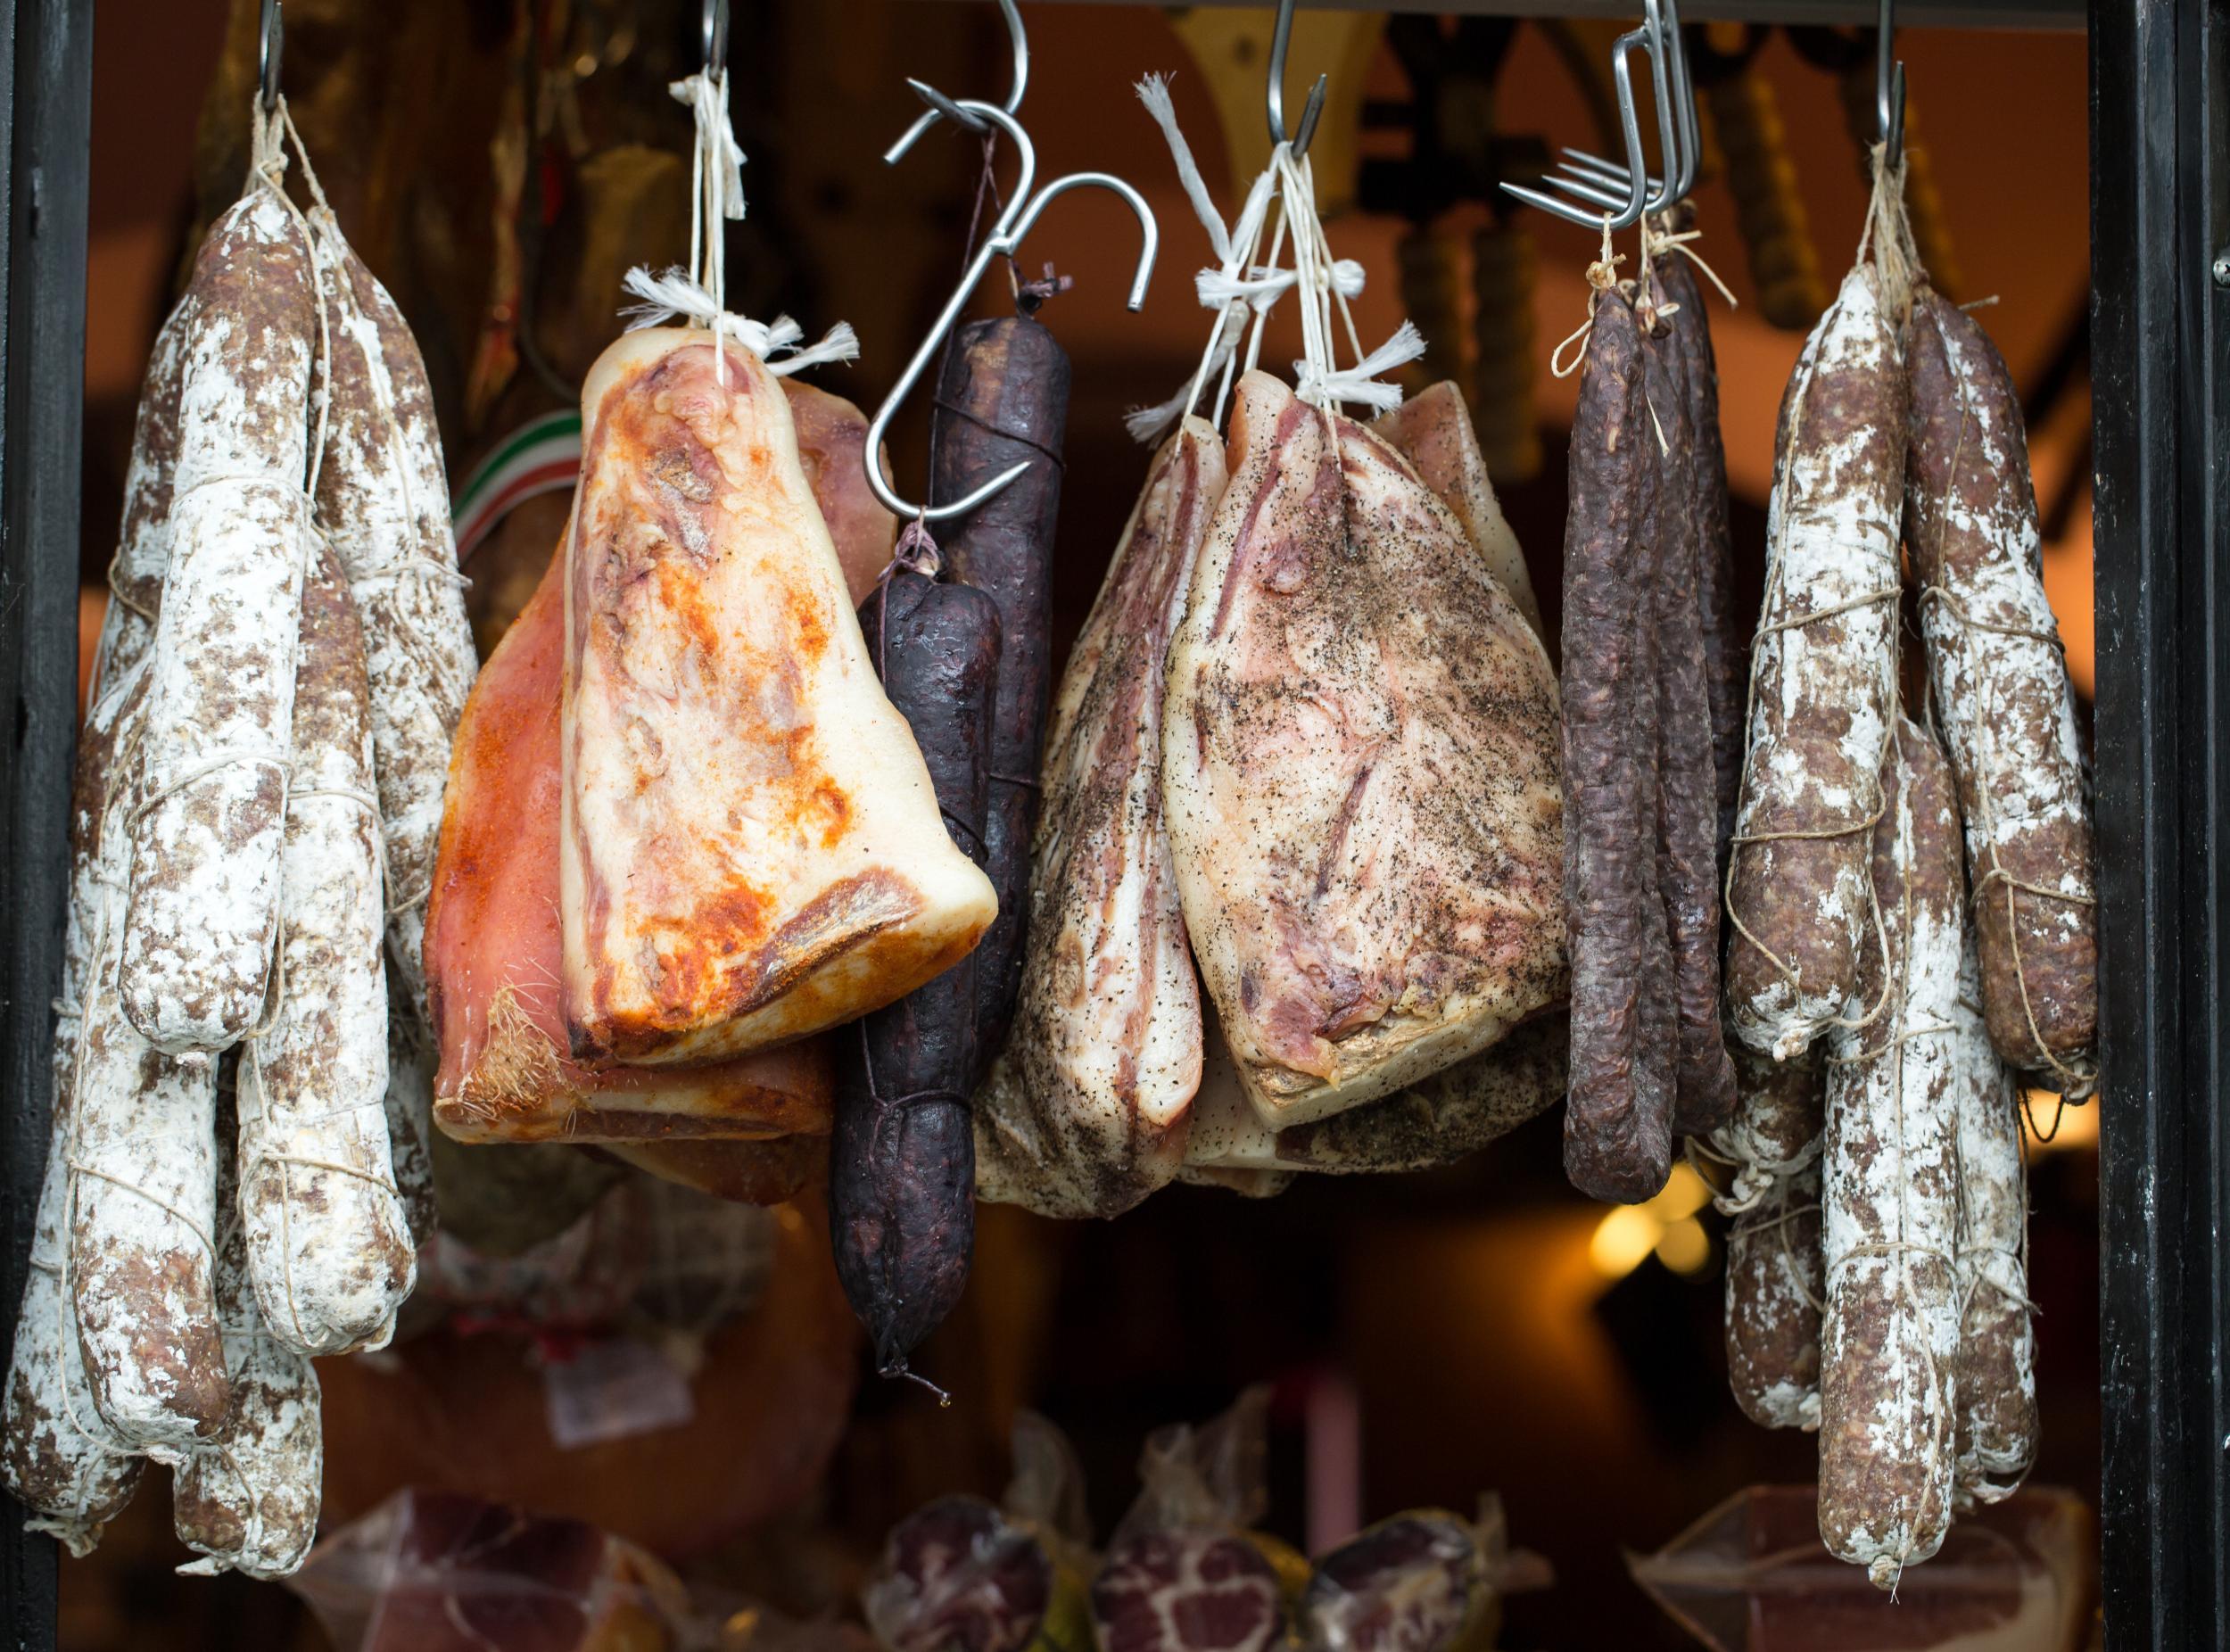 Browse Verona's delis for delicious sausages, oils and cheeses